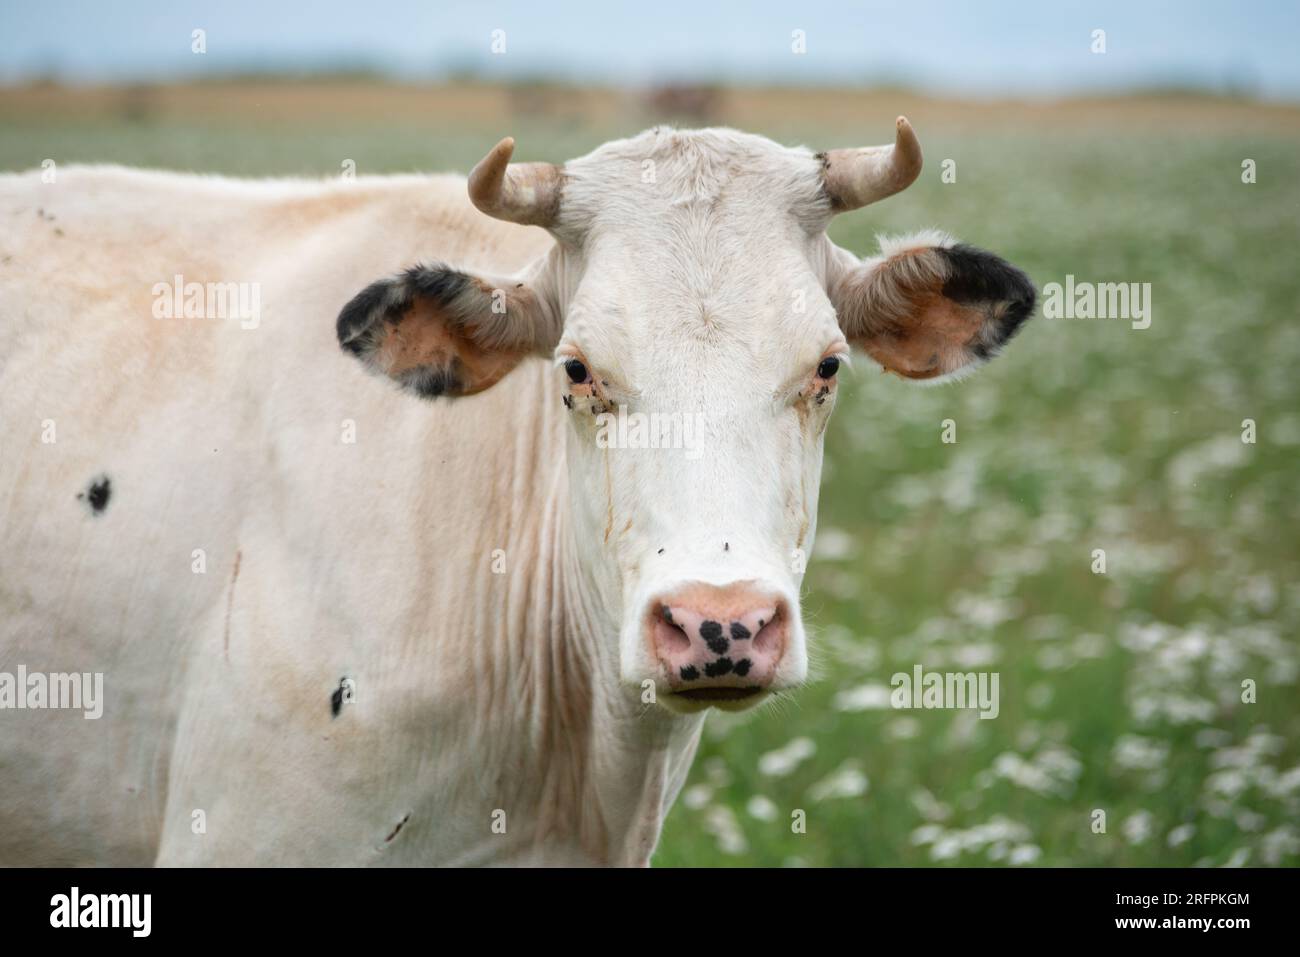 Portrait of a cow. Portrait of a white cow with horns in green grass. Stock Photo